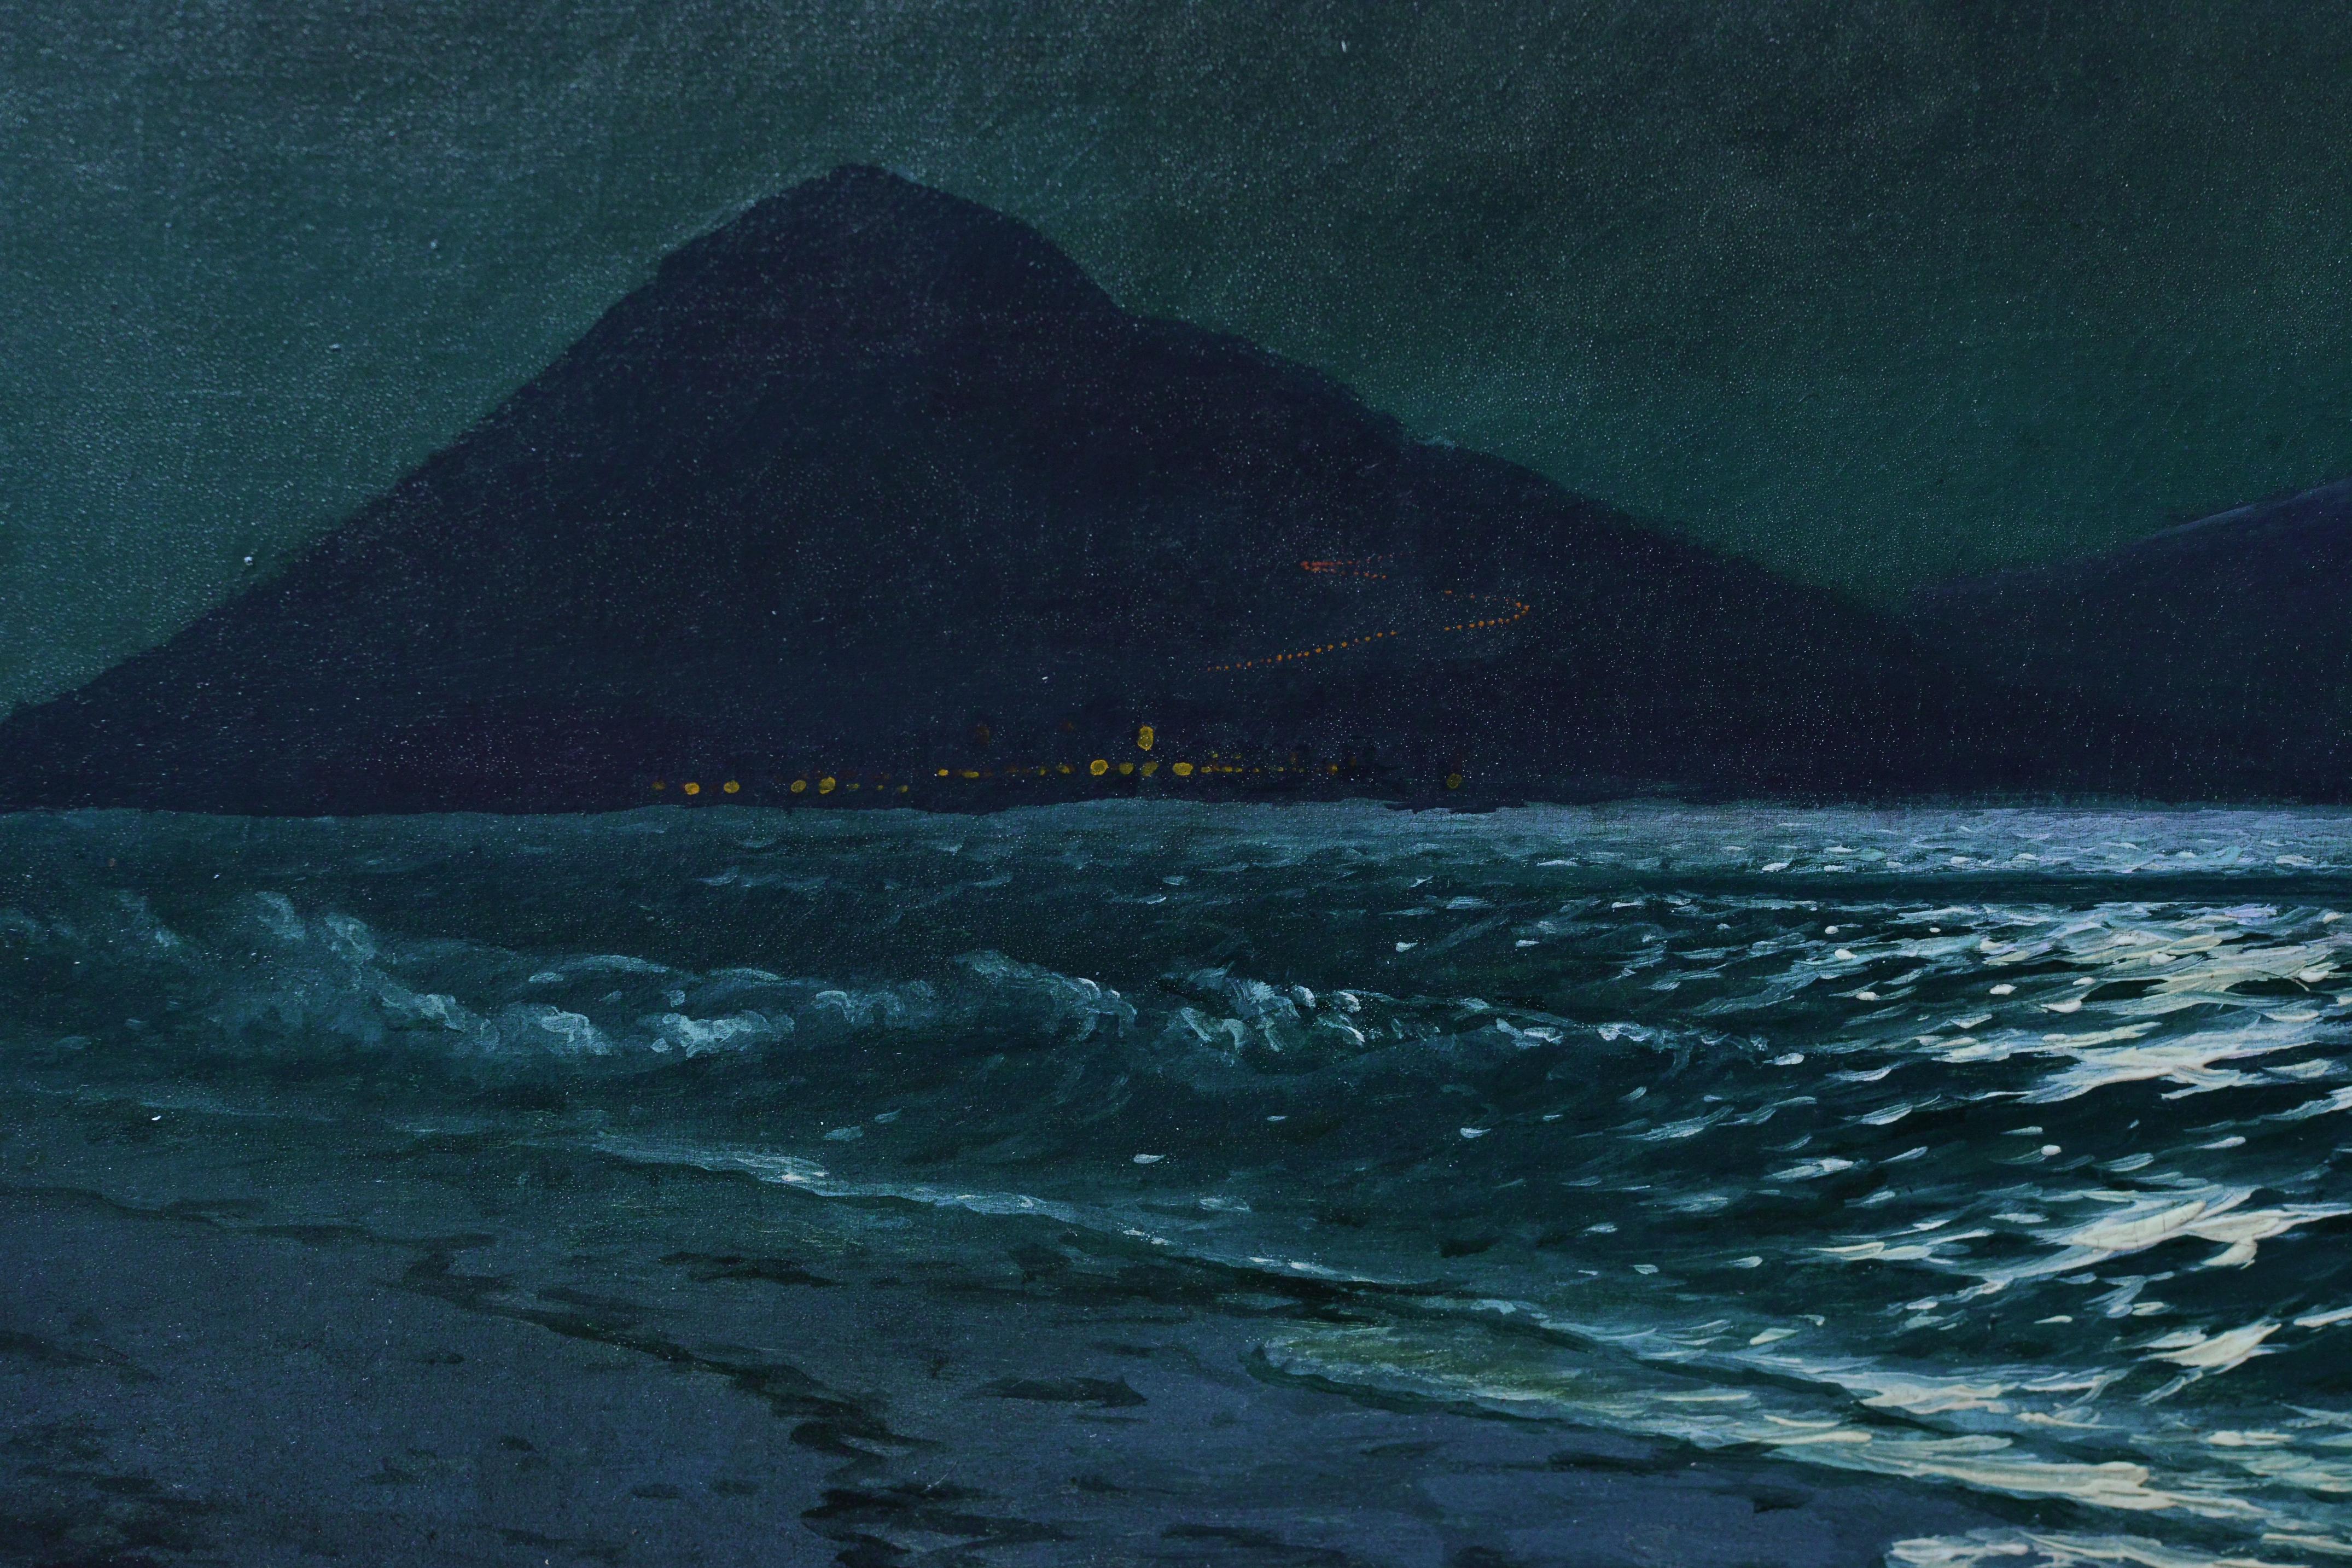 Signed lower left: 'G. Kalmykov' - attributed Grigory Odisseevich Kalmykov (1873 - 1942), Russian landscape painter, graduate of the Imperial Academy of Arts. Spectacular Crimean Coastal moonlit view. The artist visually divides the painting into